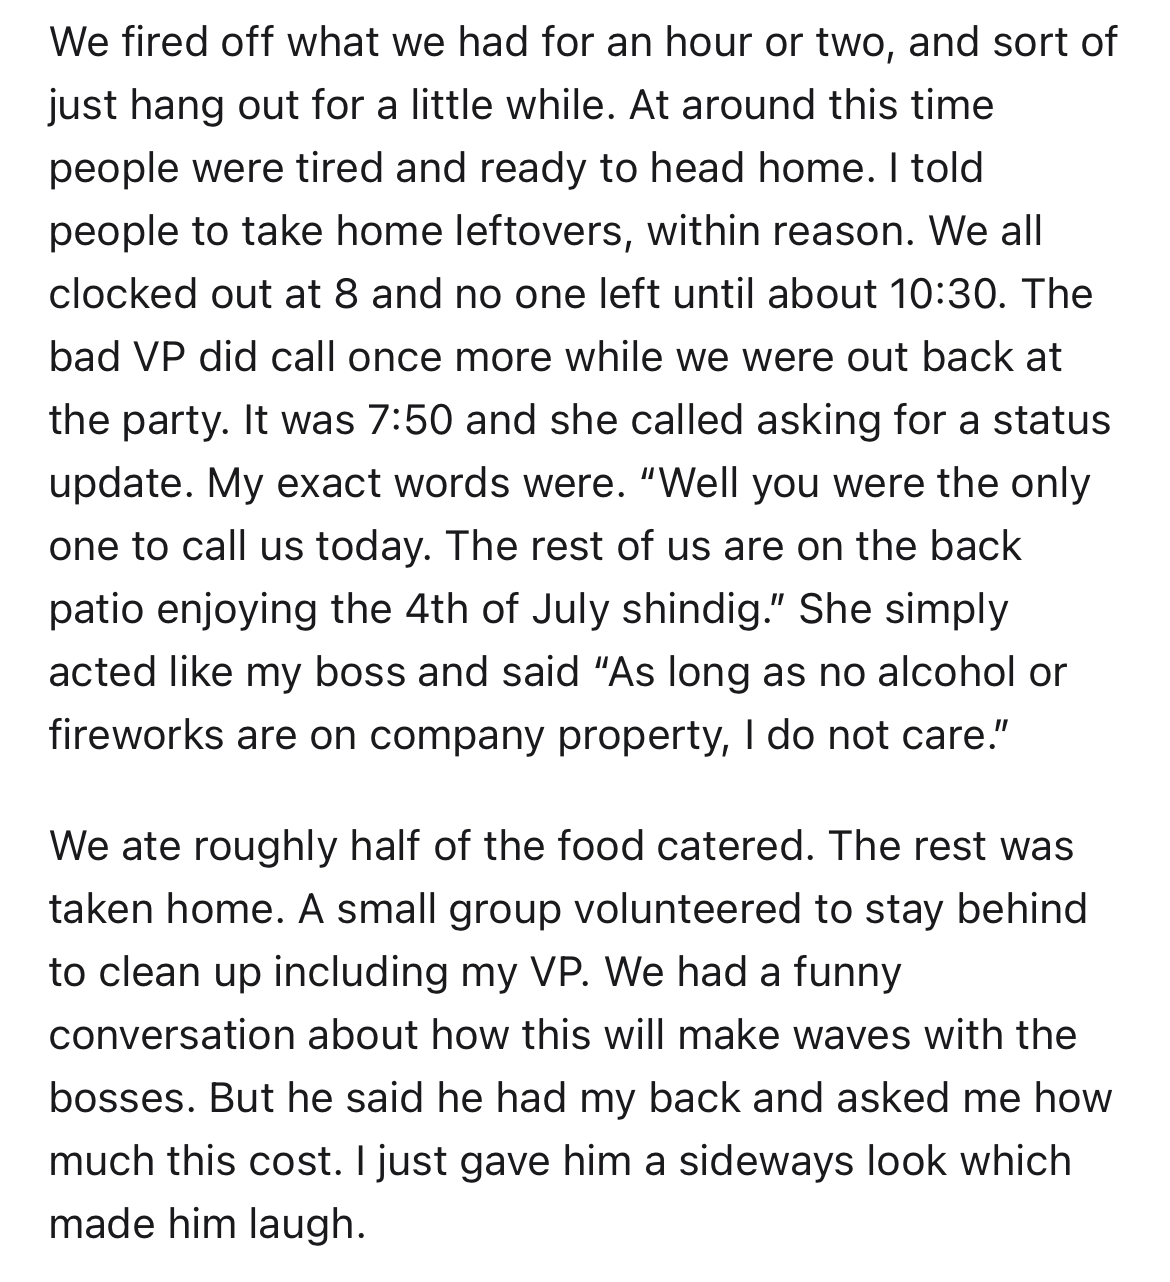 employees throw $6k 4th of July party at work -documents - We fired off what we had for an hour or two, and sort of just hang out for a little while. At around this time people were tired and ready to head home. I told people to take home leftovers, withi